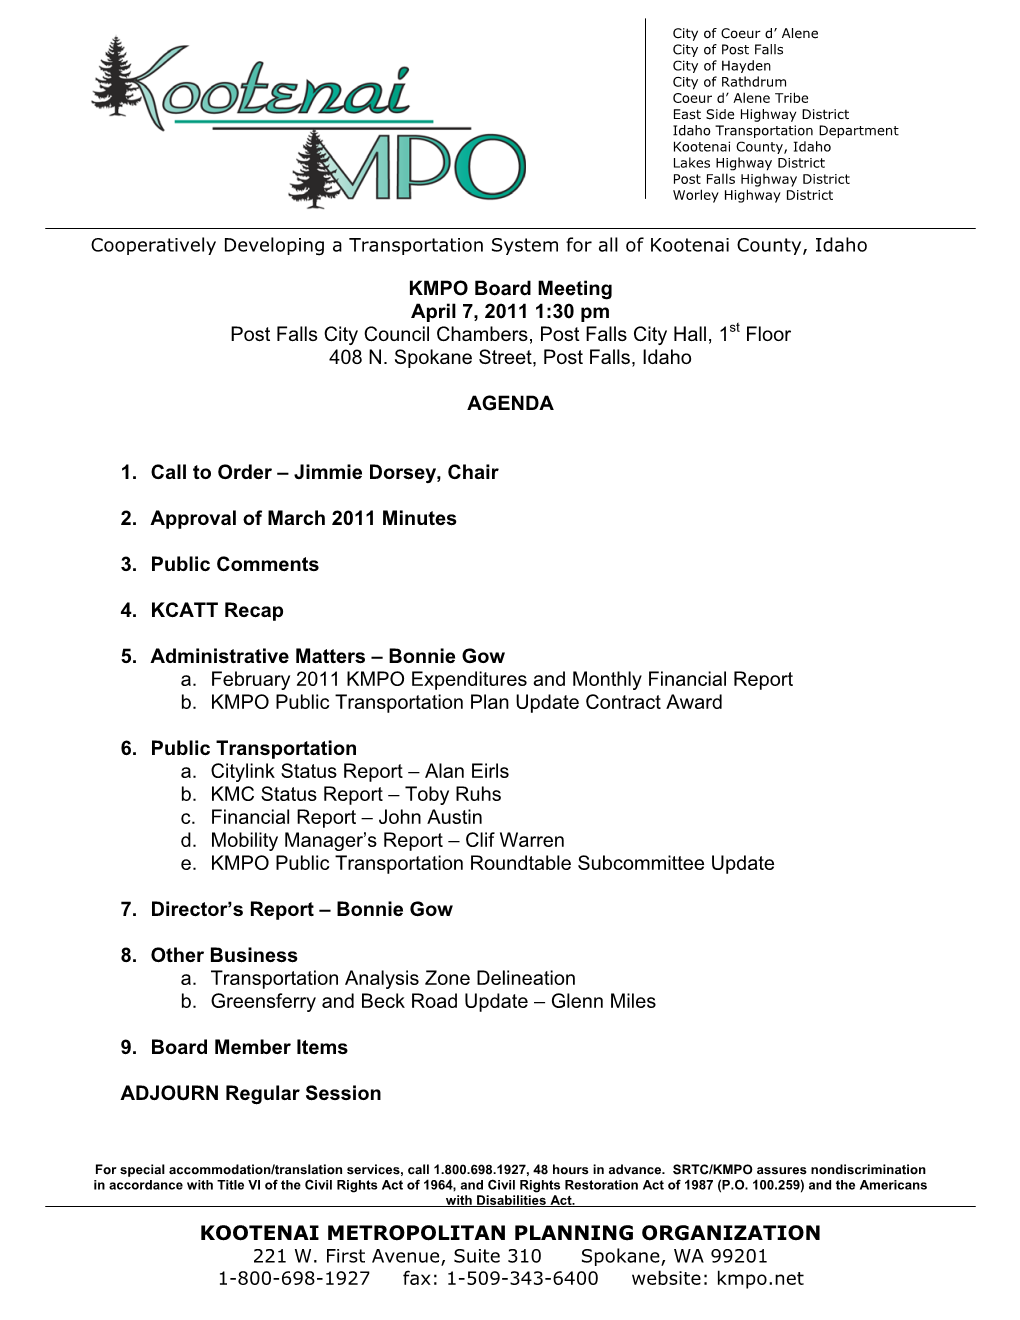 KMPO Board Meeting April 7, 2011 1:30 Pm Post Falls City Council Chambers, Post Falls City Hall, 1St Floor 408 N